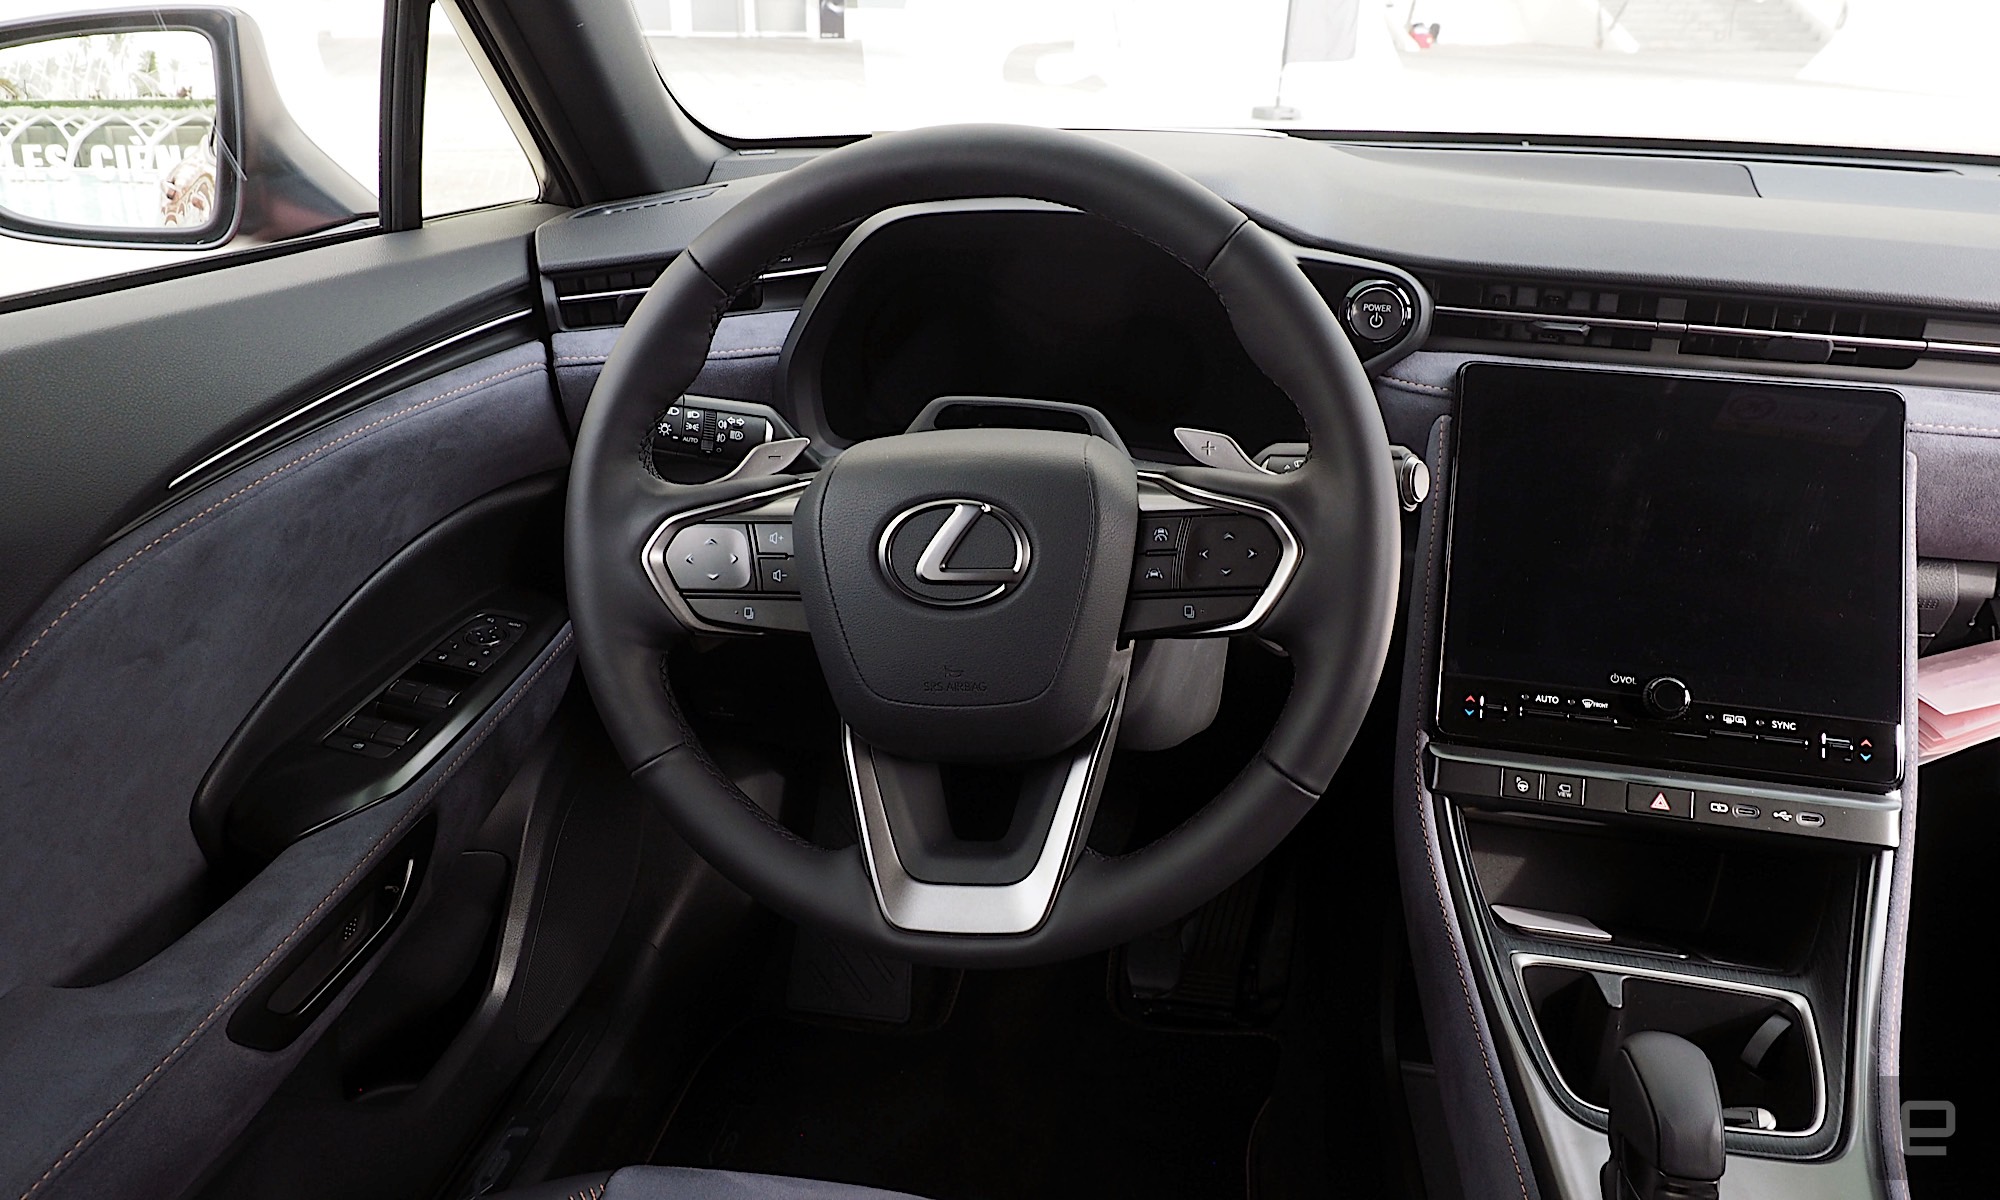 Image of the driver's position inside a Lexus LBX with a dark gray and black interior, the steering wheel is located in front of a digital instrument binnacle while an infotainment system is located to its right.